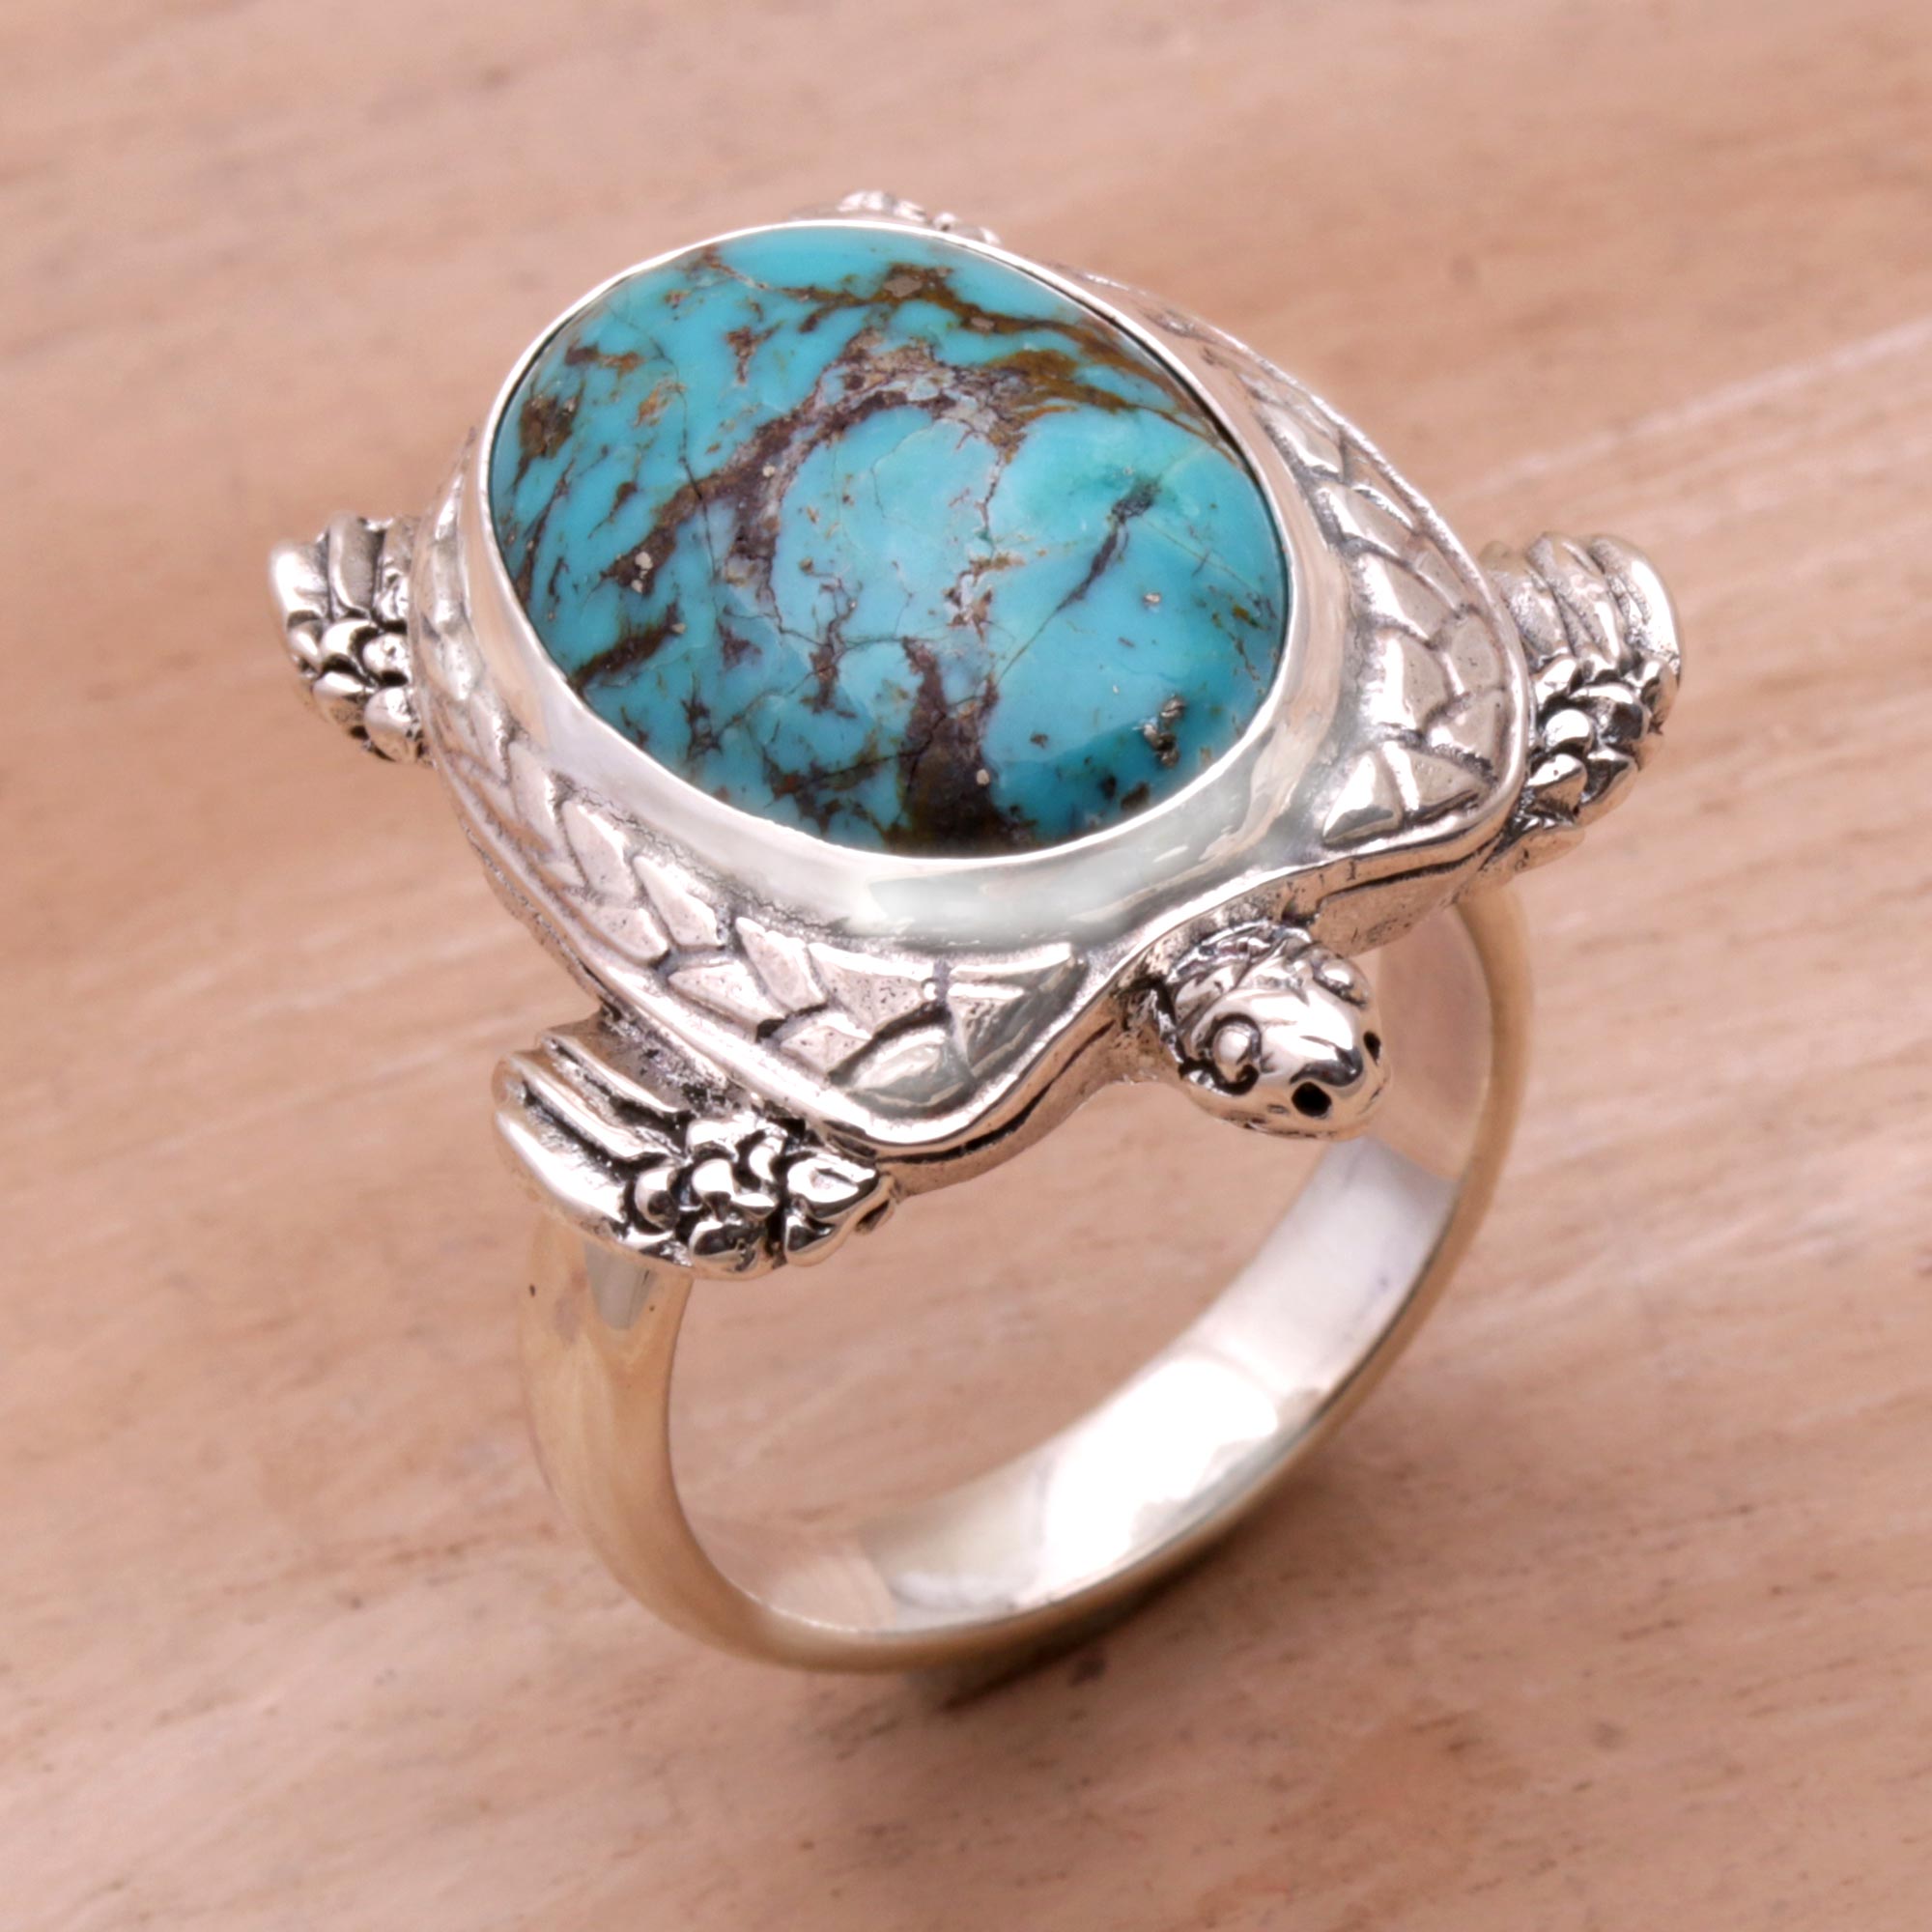 NOVICA Chelonia Turtle Men's Sterling Silver And Reconstituted Turquoise Ring - 9.5